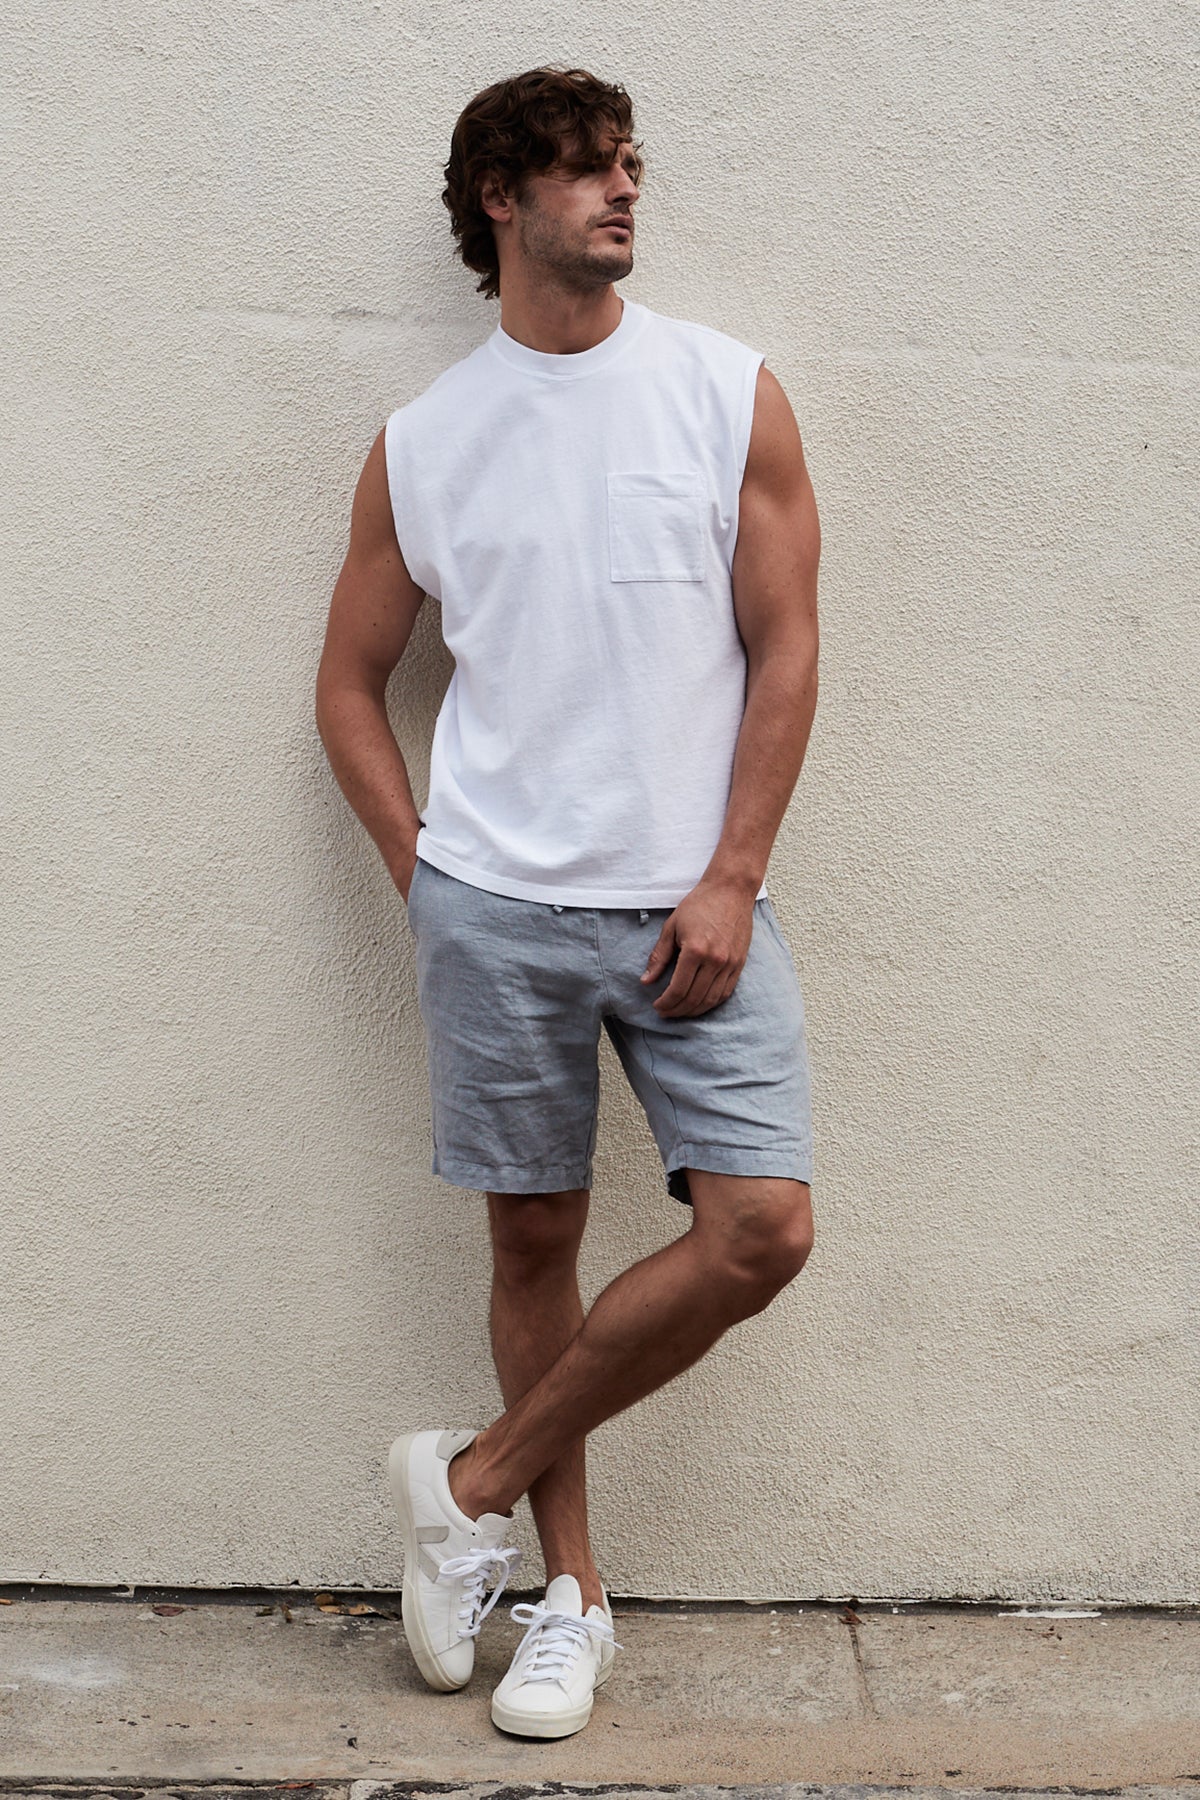 Bodhi Crew Neck Muscle Tee in White with Jonathan Short in Chambray Front 2-24705622573249